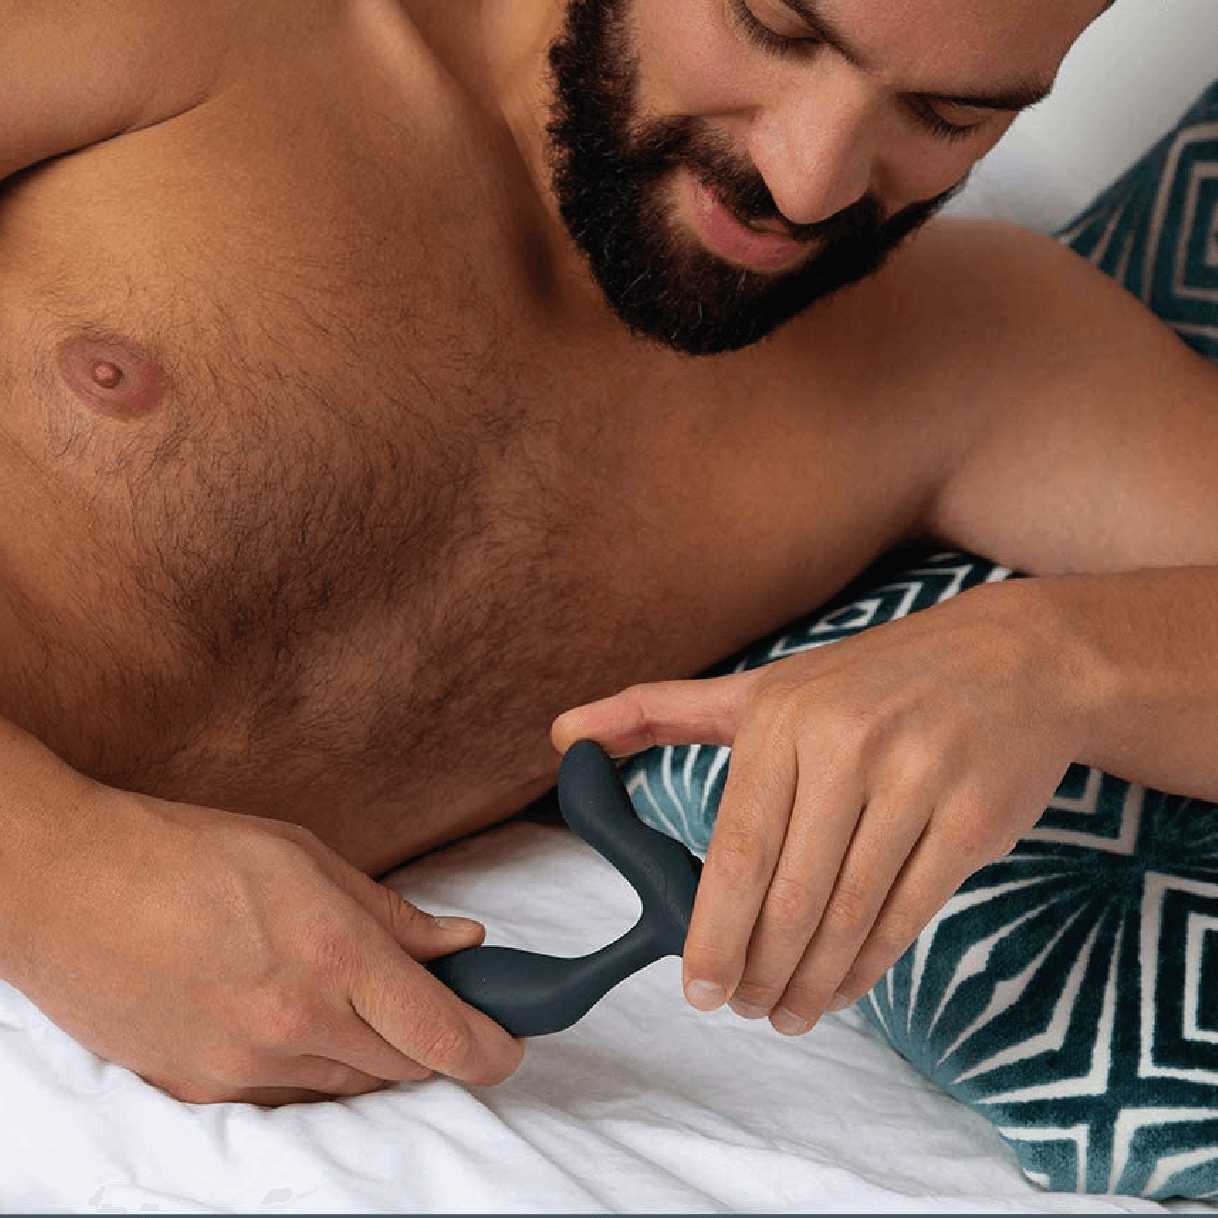 A man with the prostate massager Vector from We-Vibe in his hands.